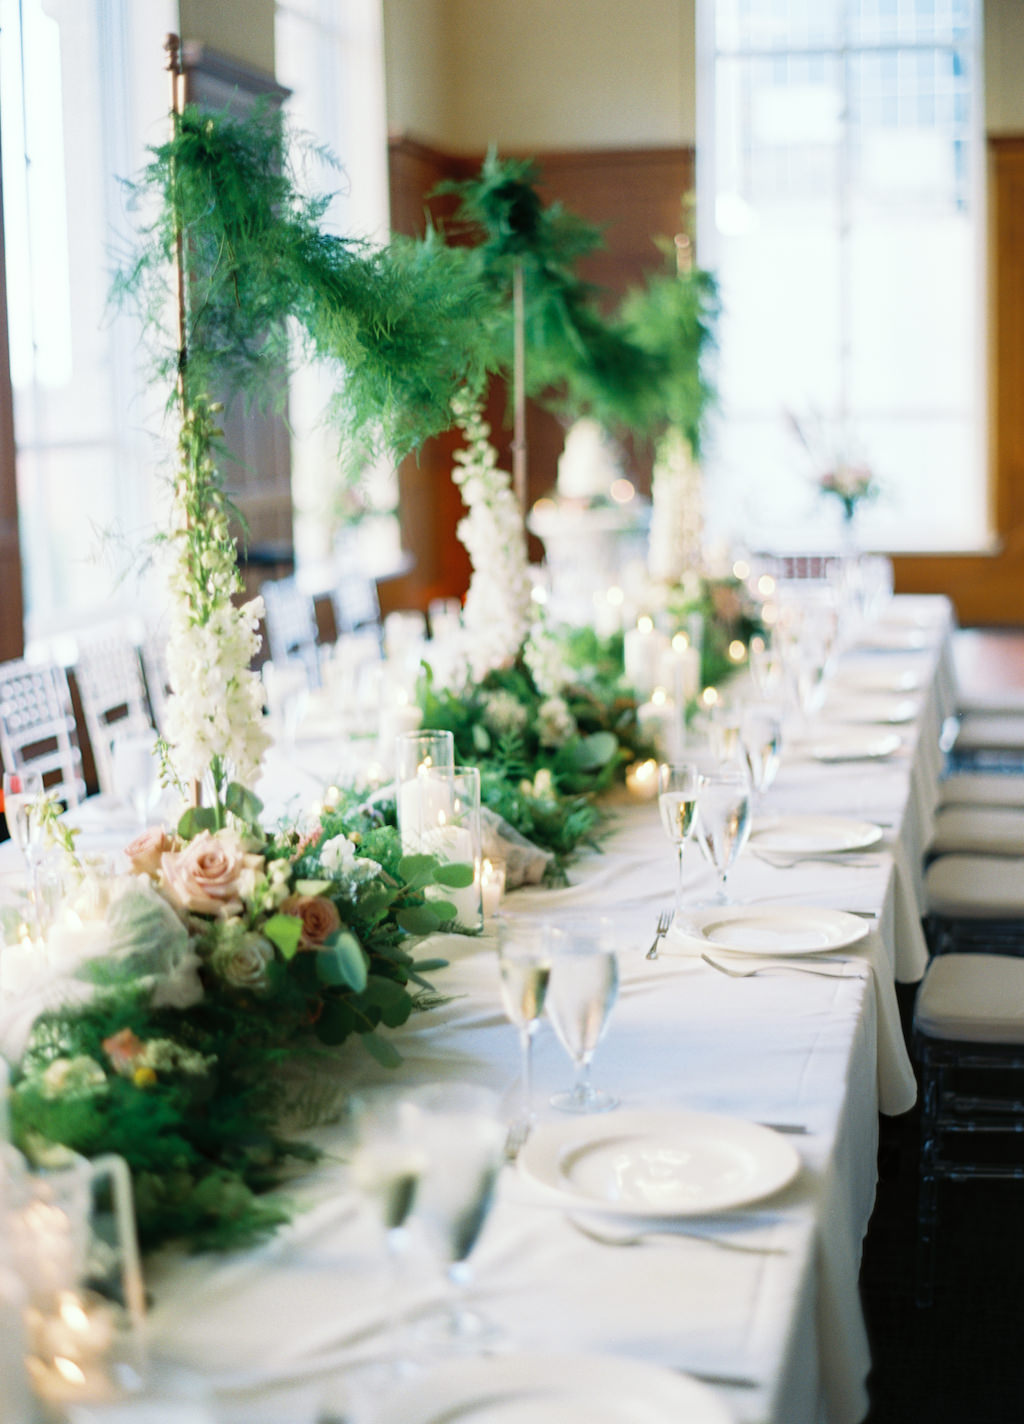 Hotel Ballroom White and Greenery Wedding Reception with Long Feasting Tables, Extra Tall White Spray and Garland Runner Centerpieces, with Ivory and Blush Roses and Clear Chiavari Chairs | Downtown Tampa Venue Le Meridien